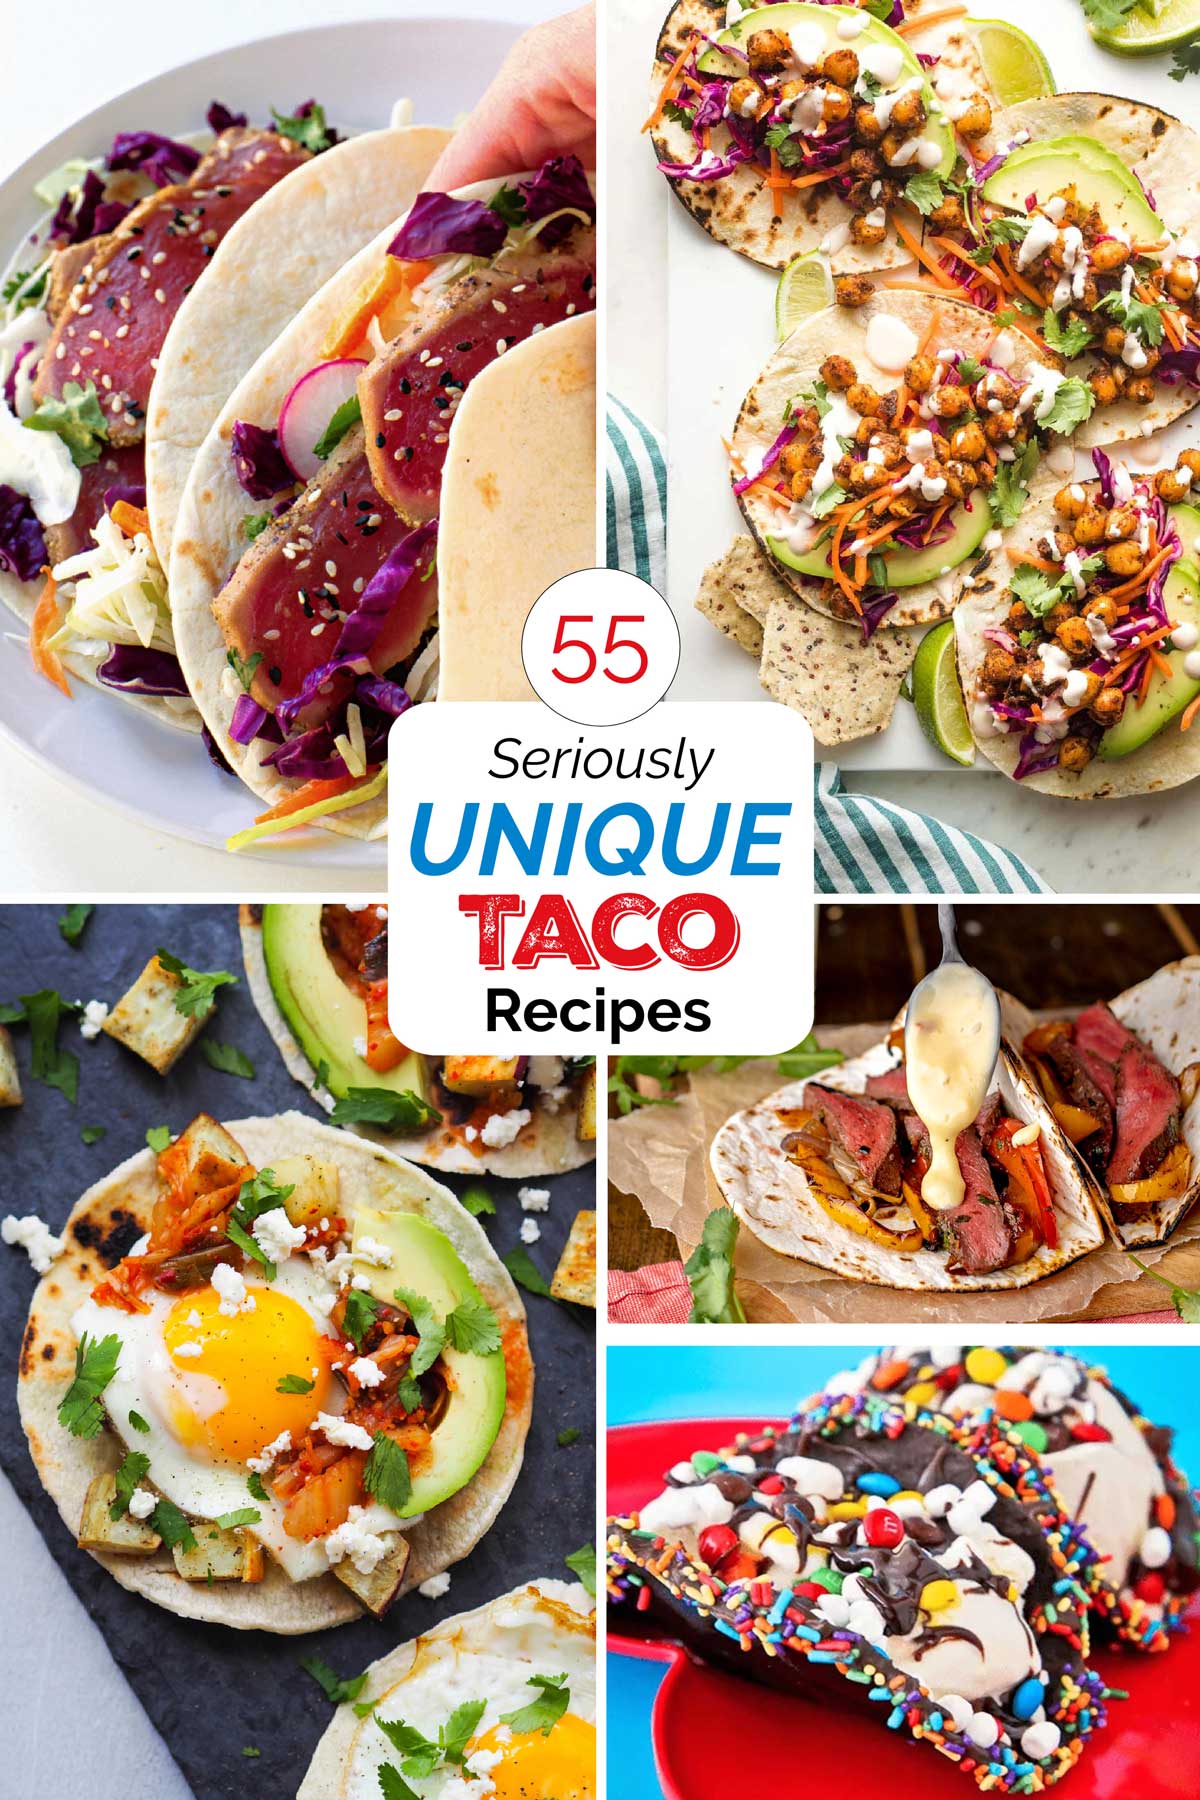 Hero collage of 5 recipe photos with red, black and blue text overlay "55 Seriously Unique Taco Recipes".